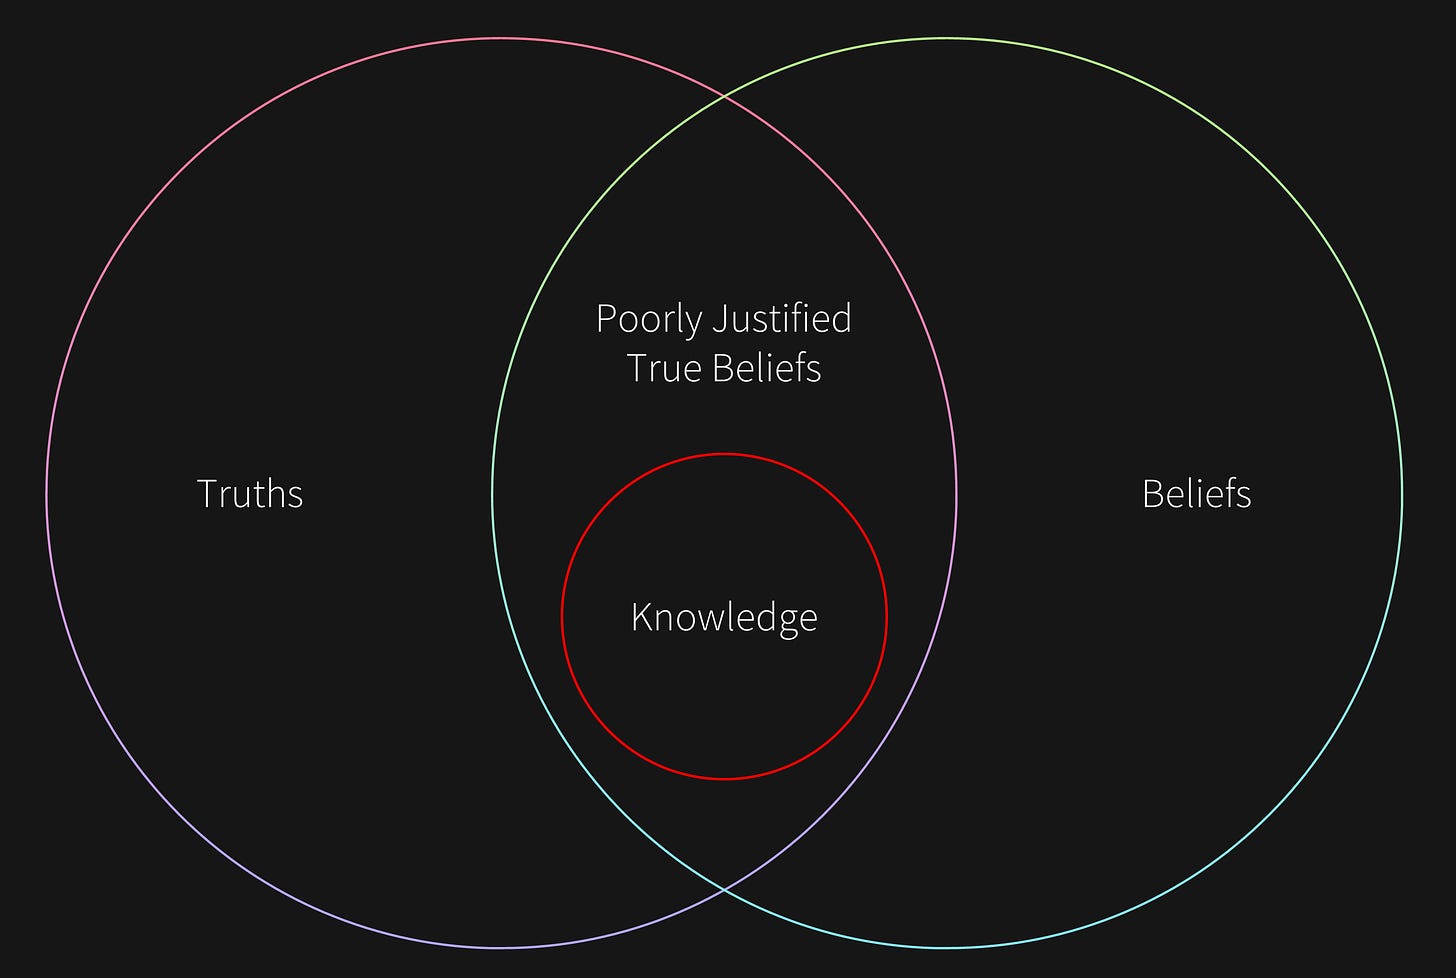 Venn diagram showing that knowledge is in the intersection of truth and belief.